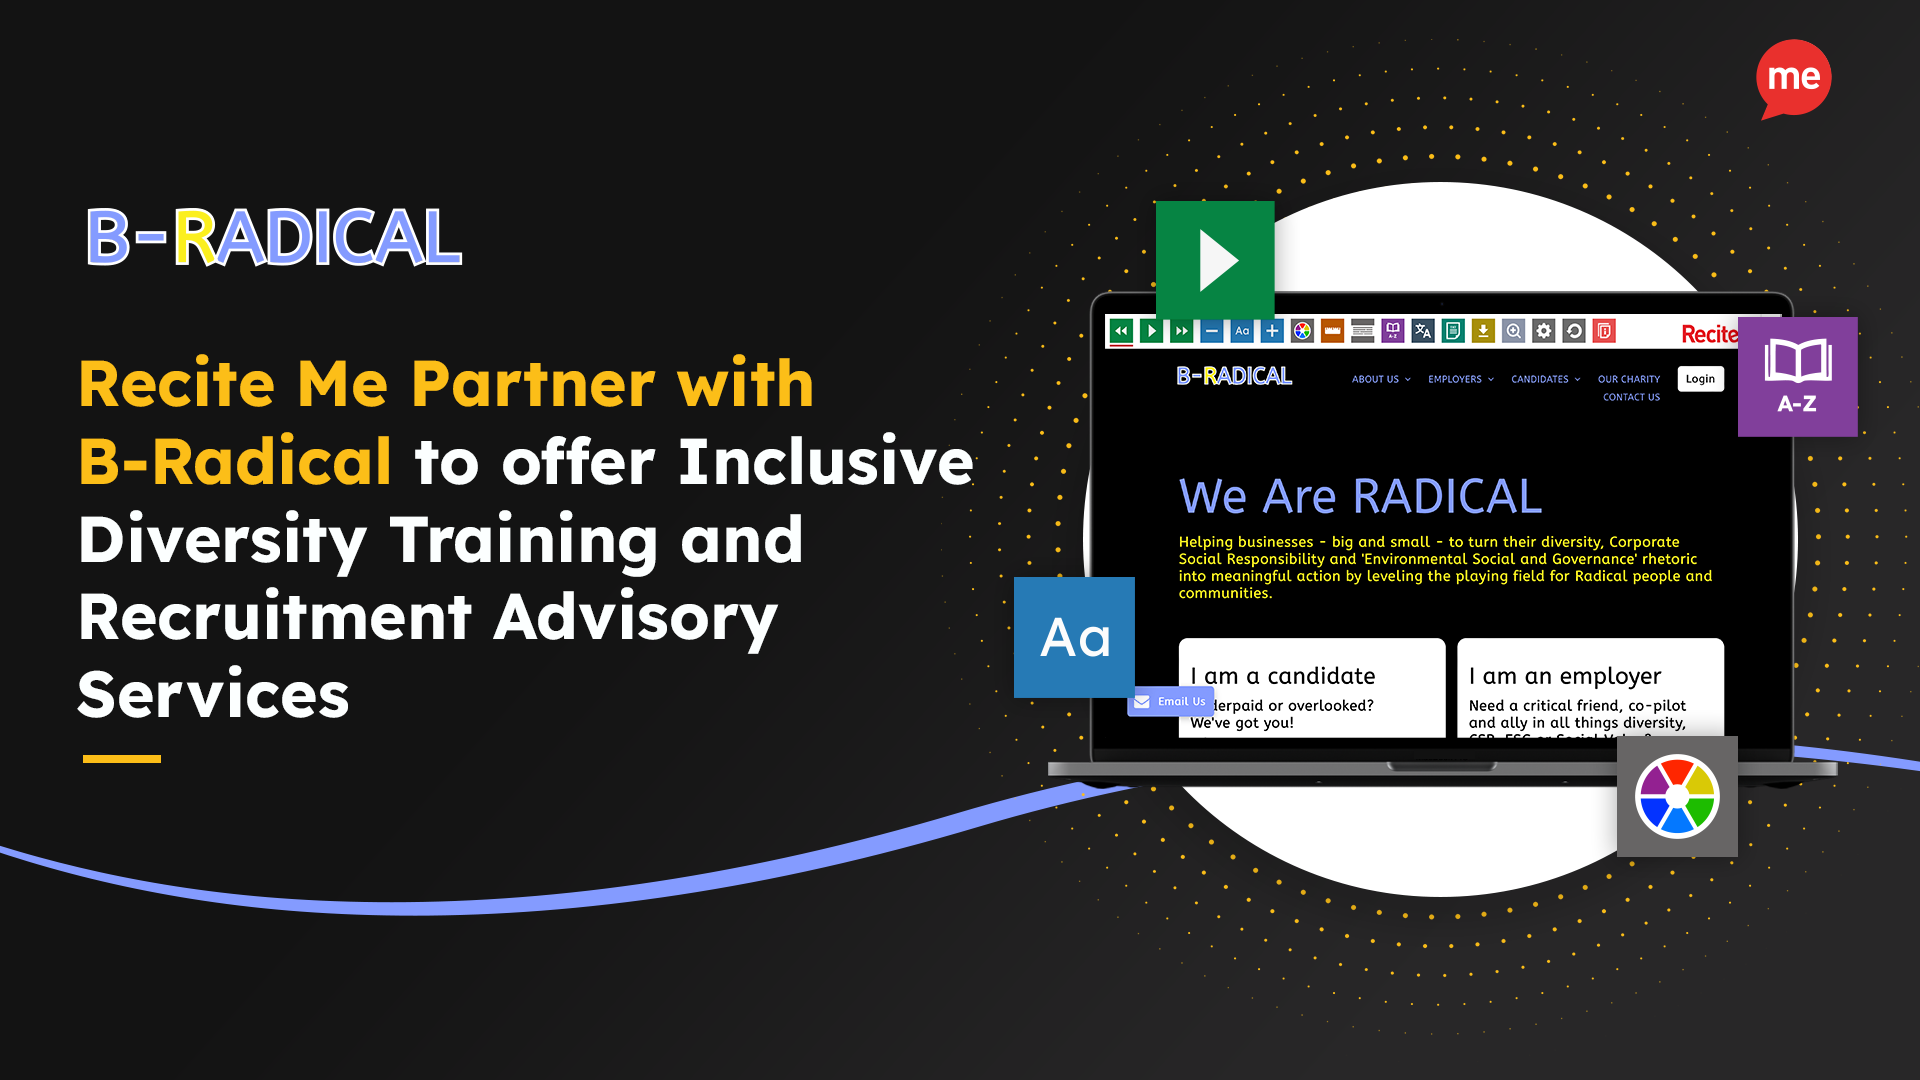 Recite Me Partner with B-Radical to offer Inclusive Diversity Training and Recruitment Advisory Services